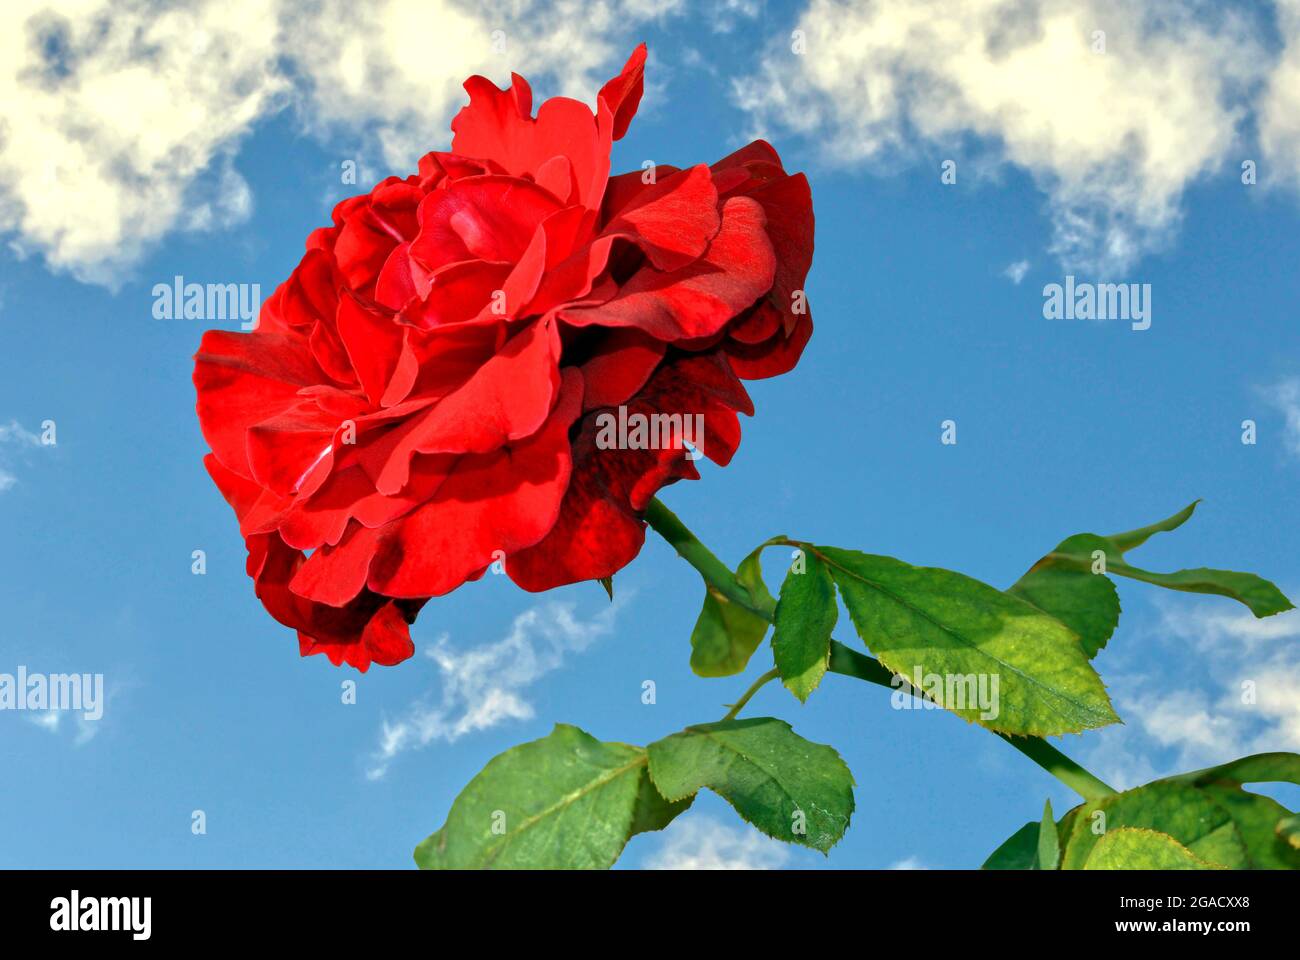 Rose Latin name Rosa Don Juan with a blue sky background Stock Photo